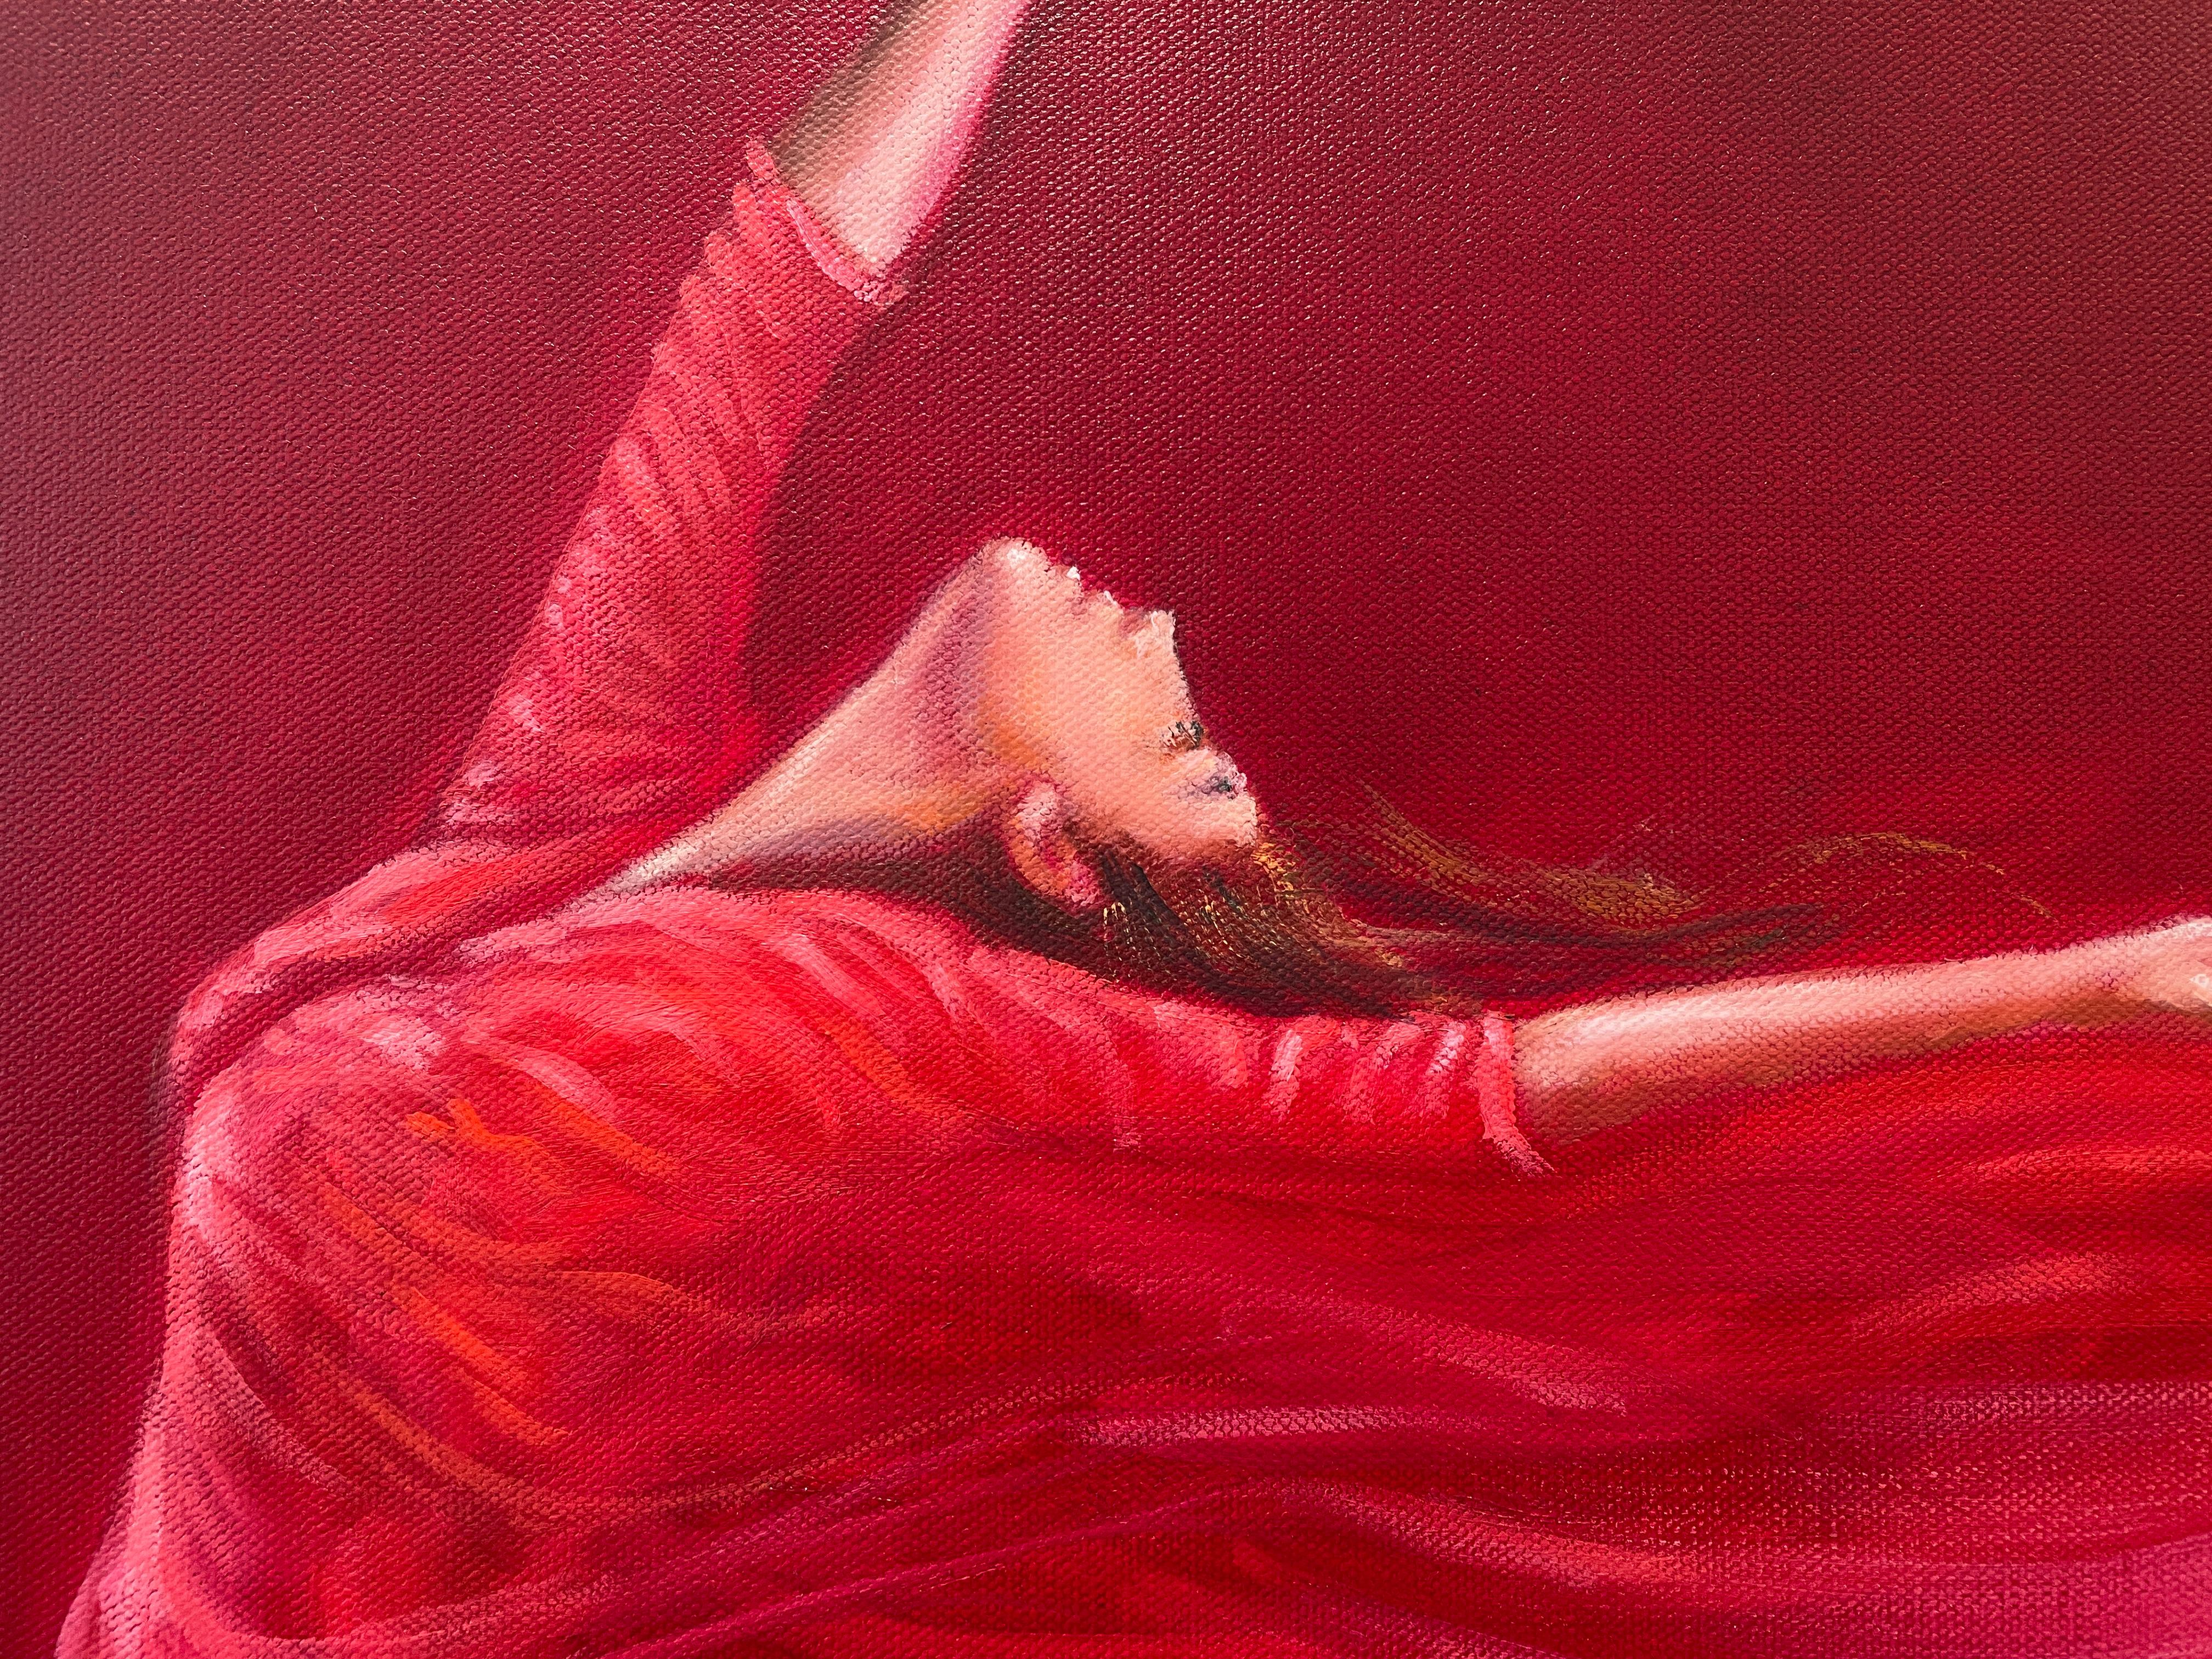 'Passione' - Ballerina in Red - The Ballet Series - Figurative Oil Painting For Sale 2